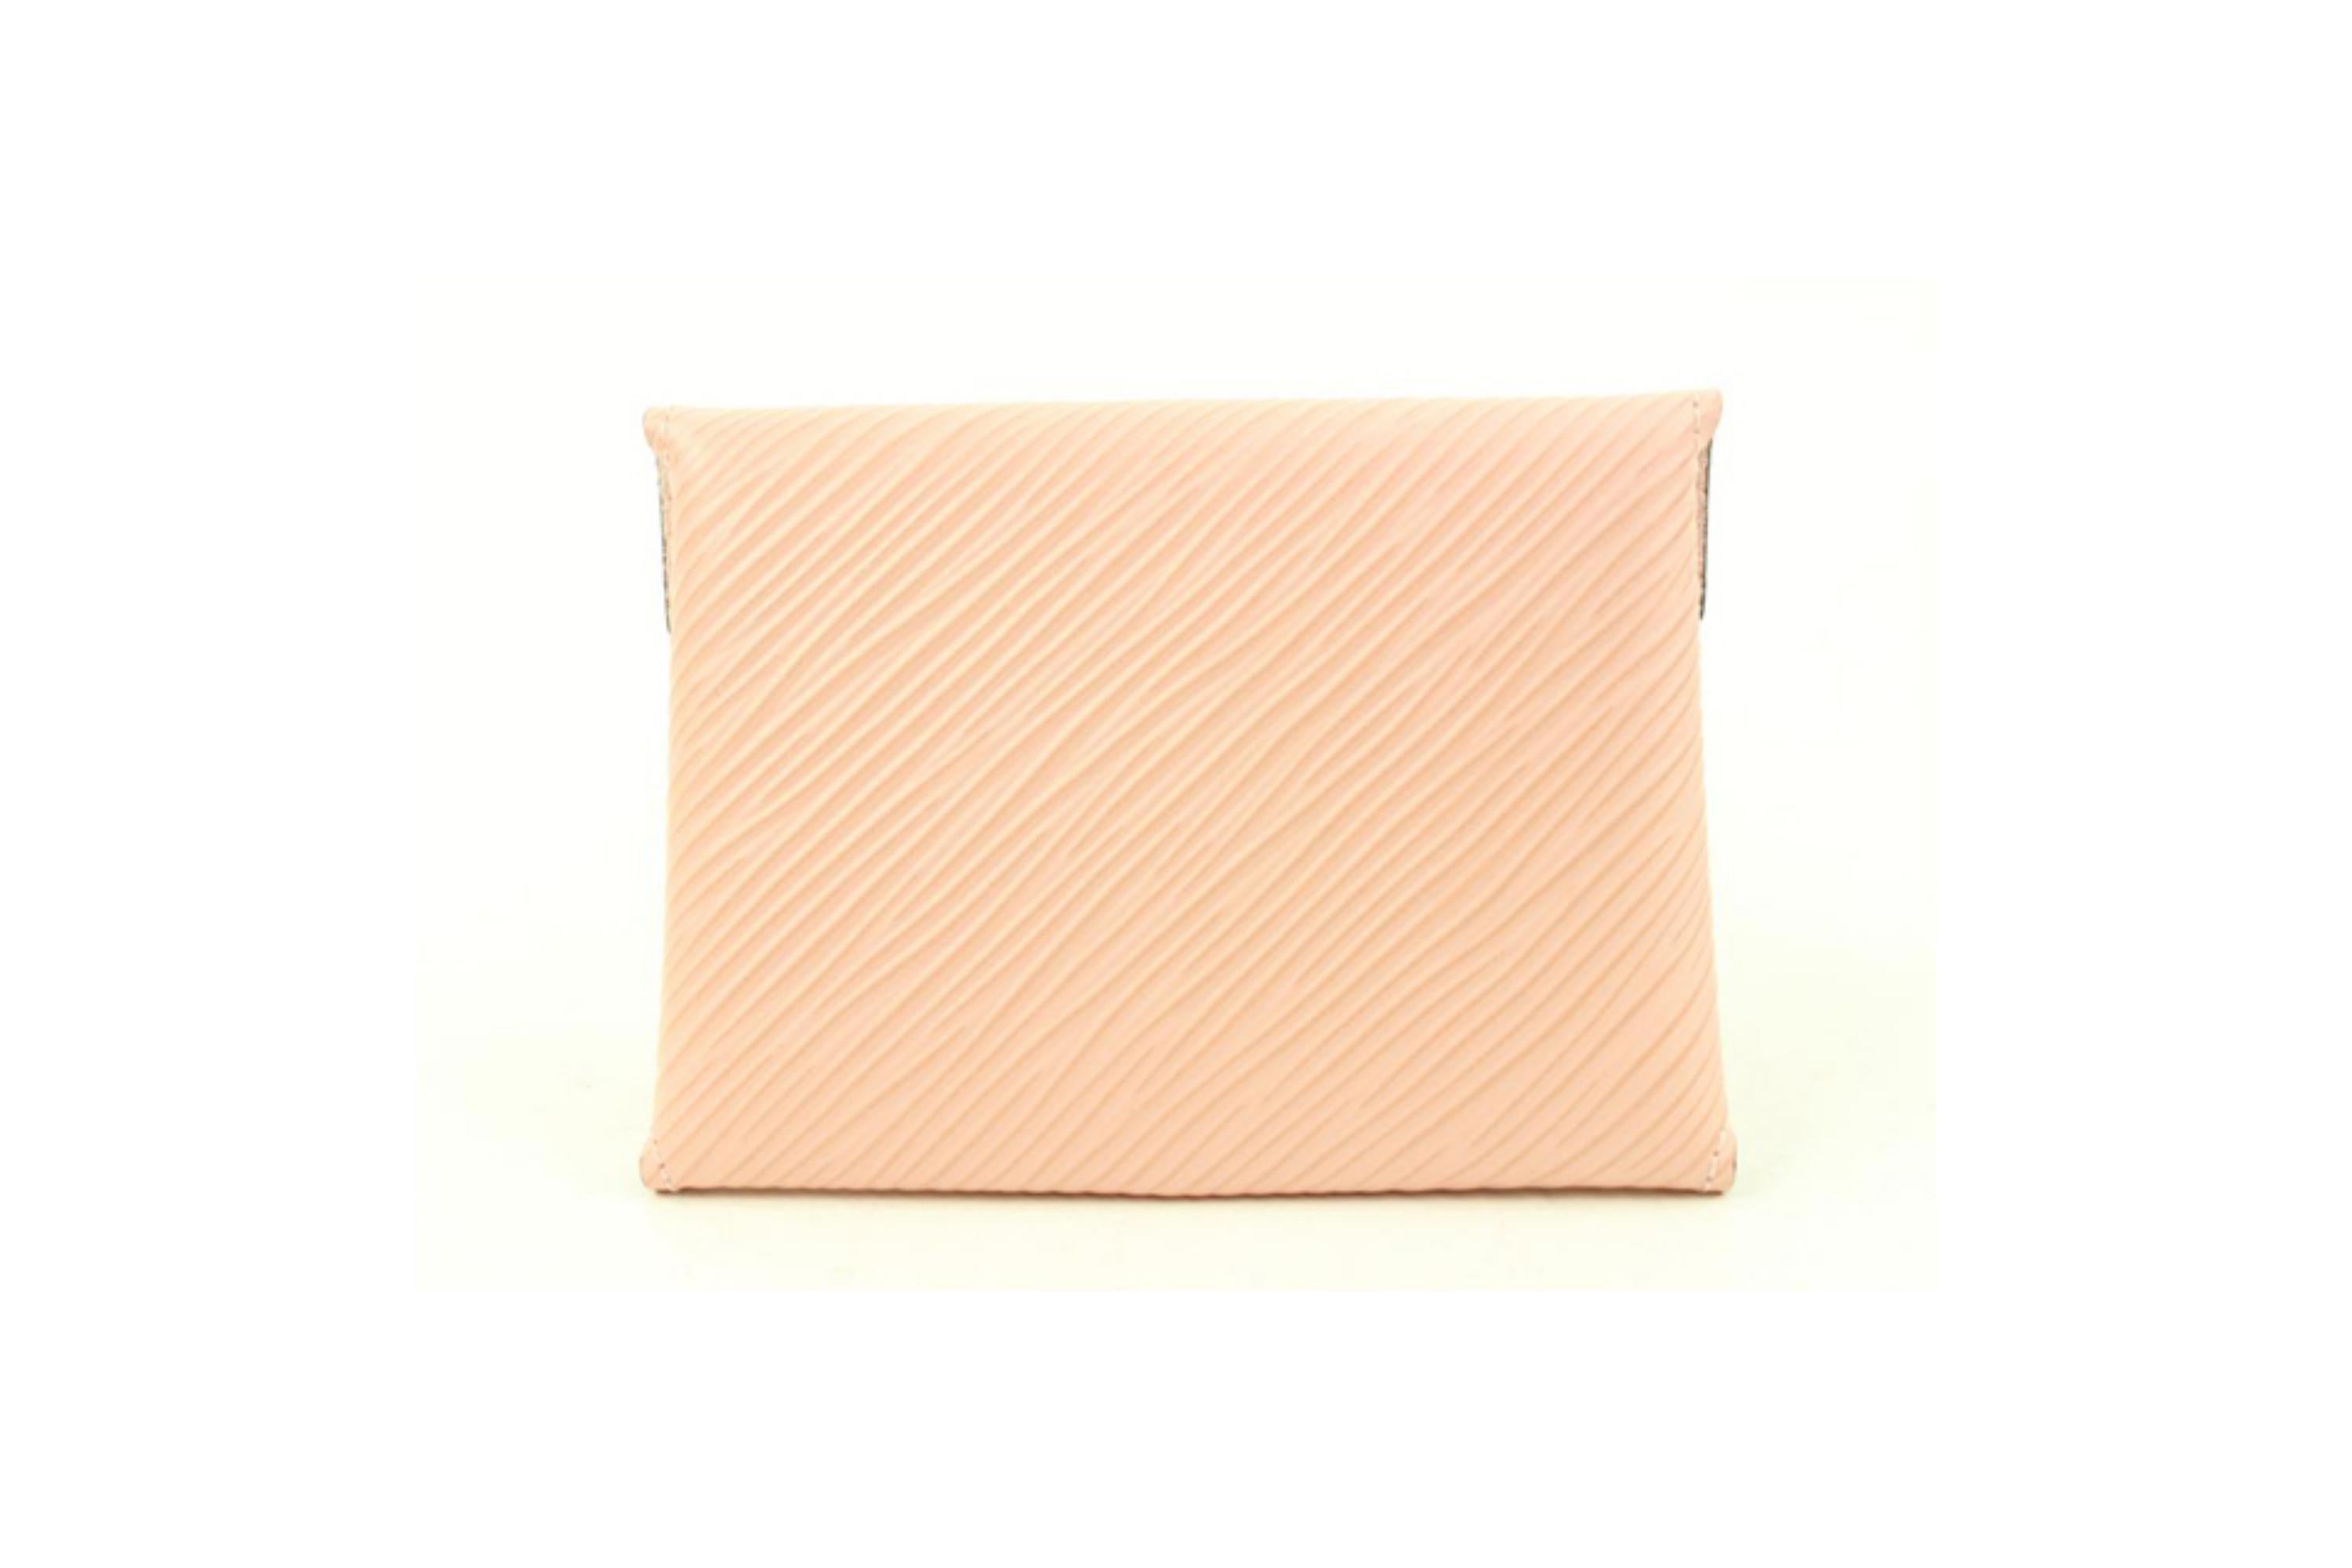 Louis Vuitton Pink Epi Leather Kirigami PM Envelope Pouch 75lv24s
Date Code/Serial Number: SP1159
Made In: France
Measurements: Length:  3.9